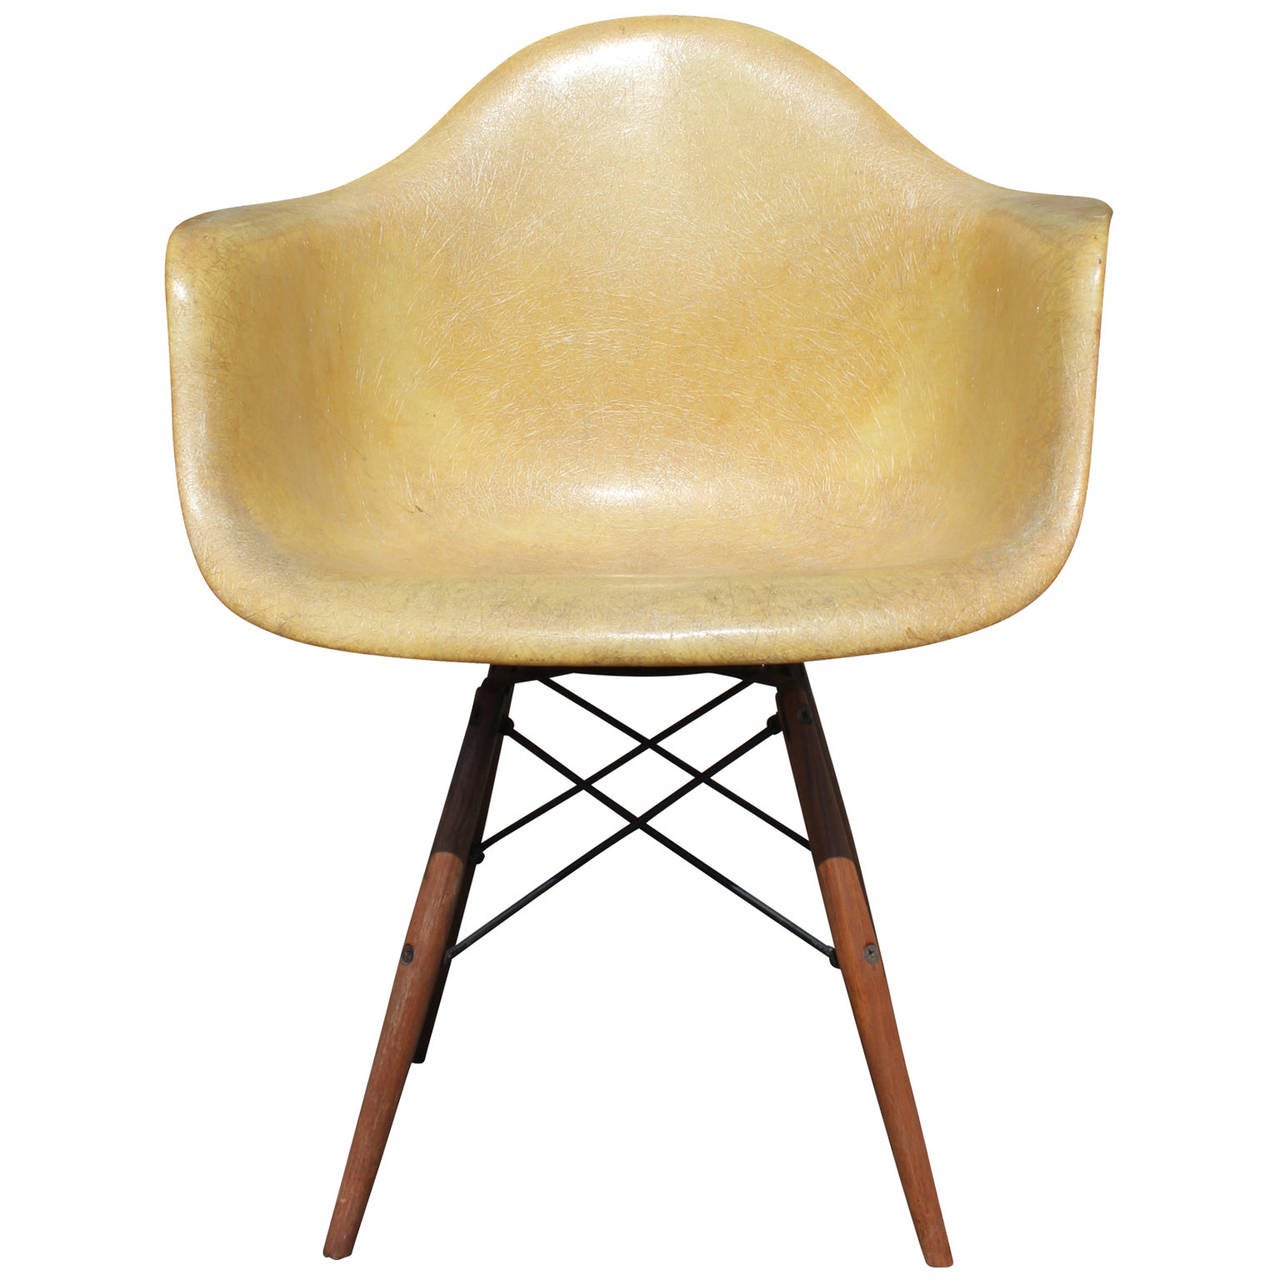 Early Eames PAW chair with walnut, swivel dowel legged base. Fiberglass shell with rope edge by Zenith Plastics. Retains original checkerboard label.